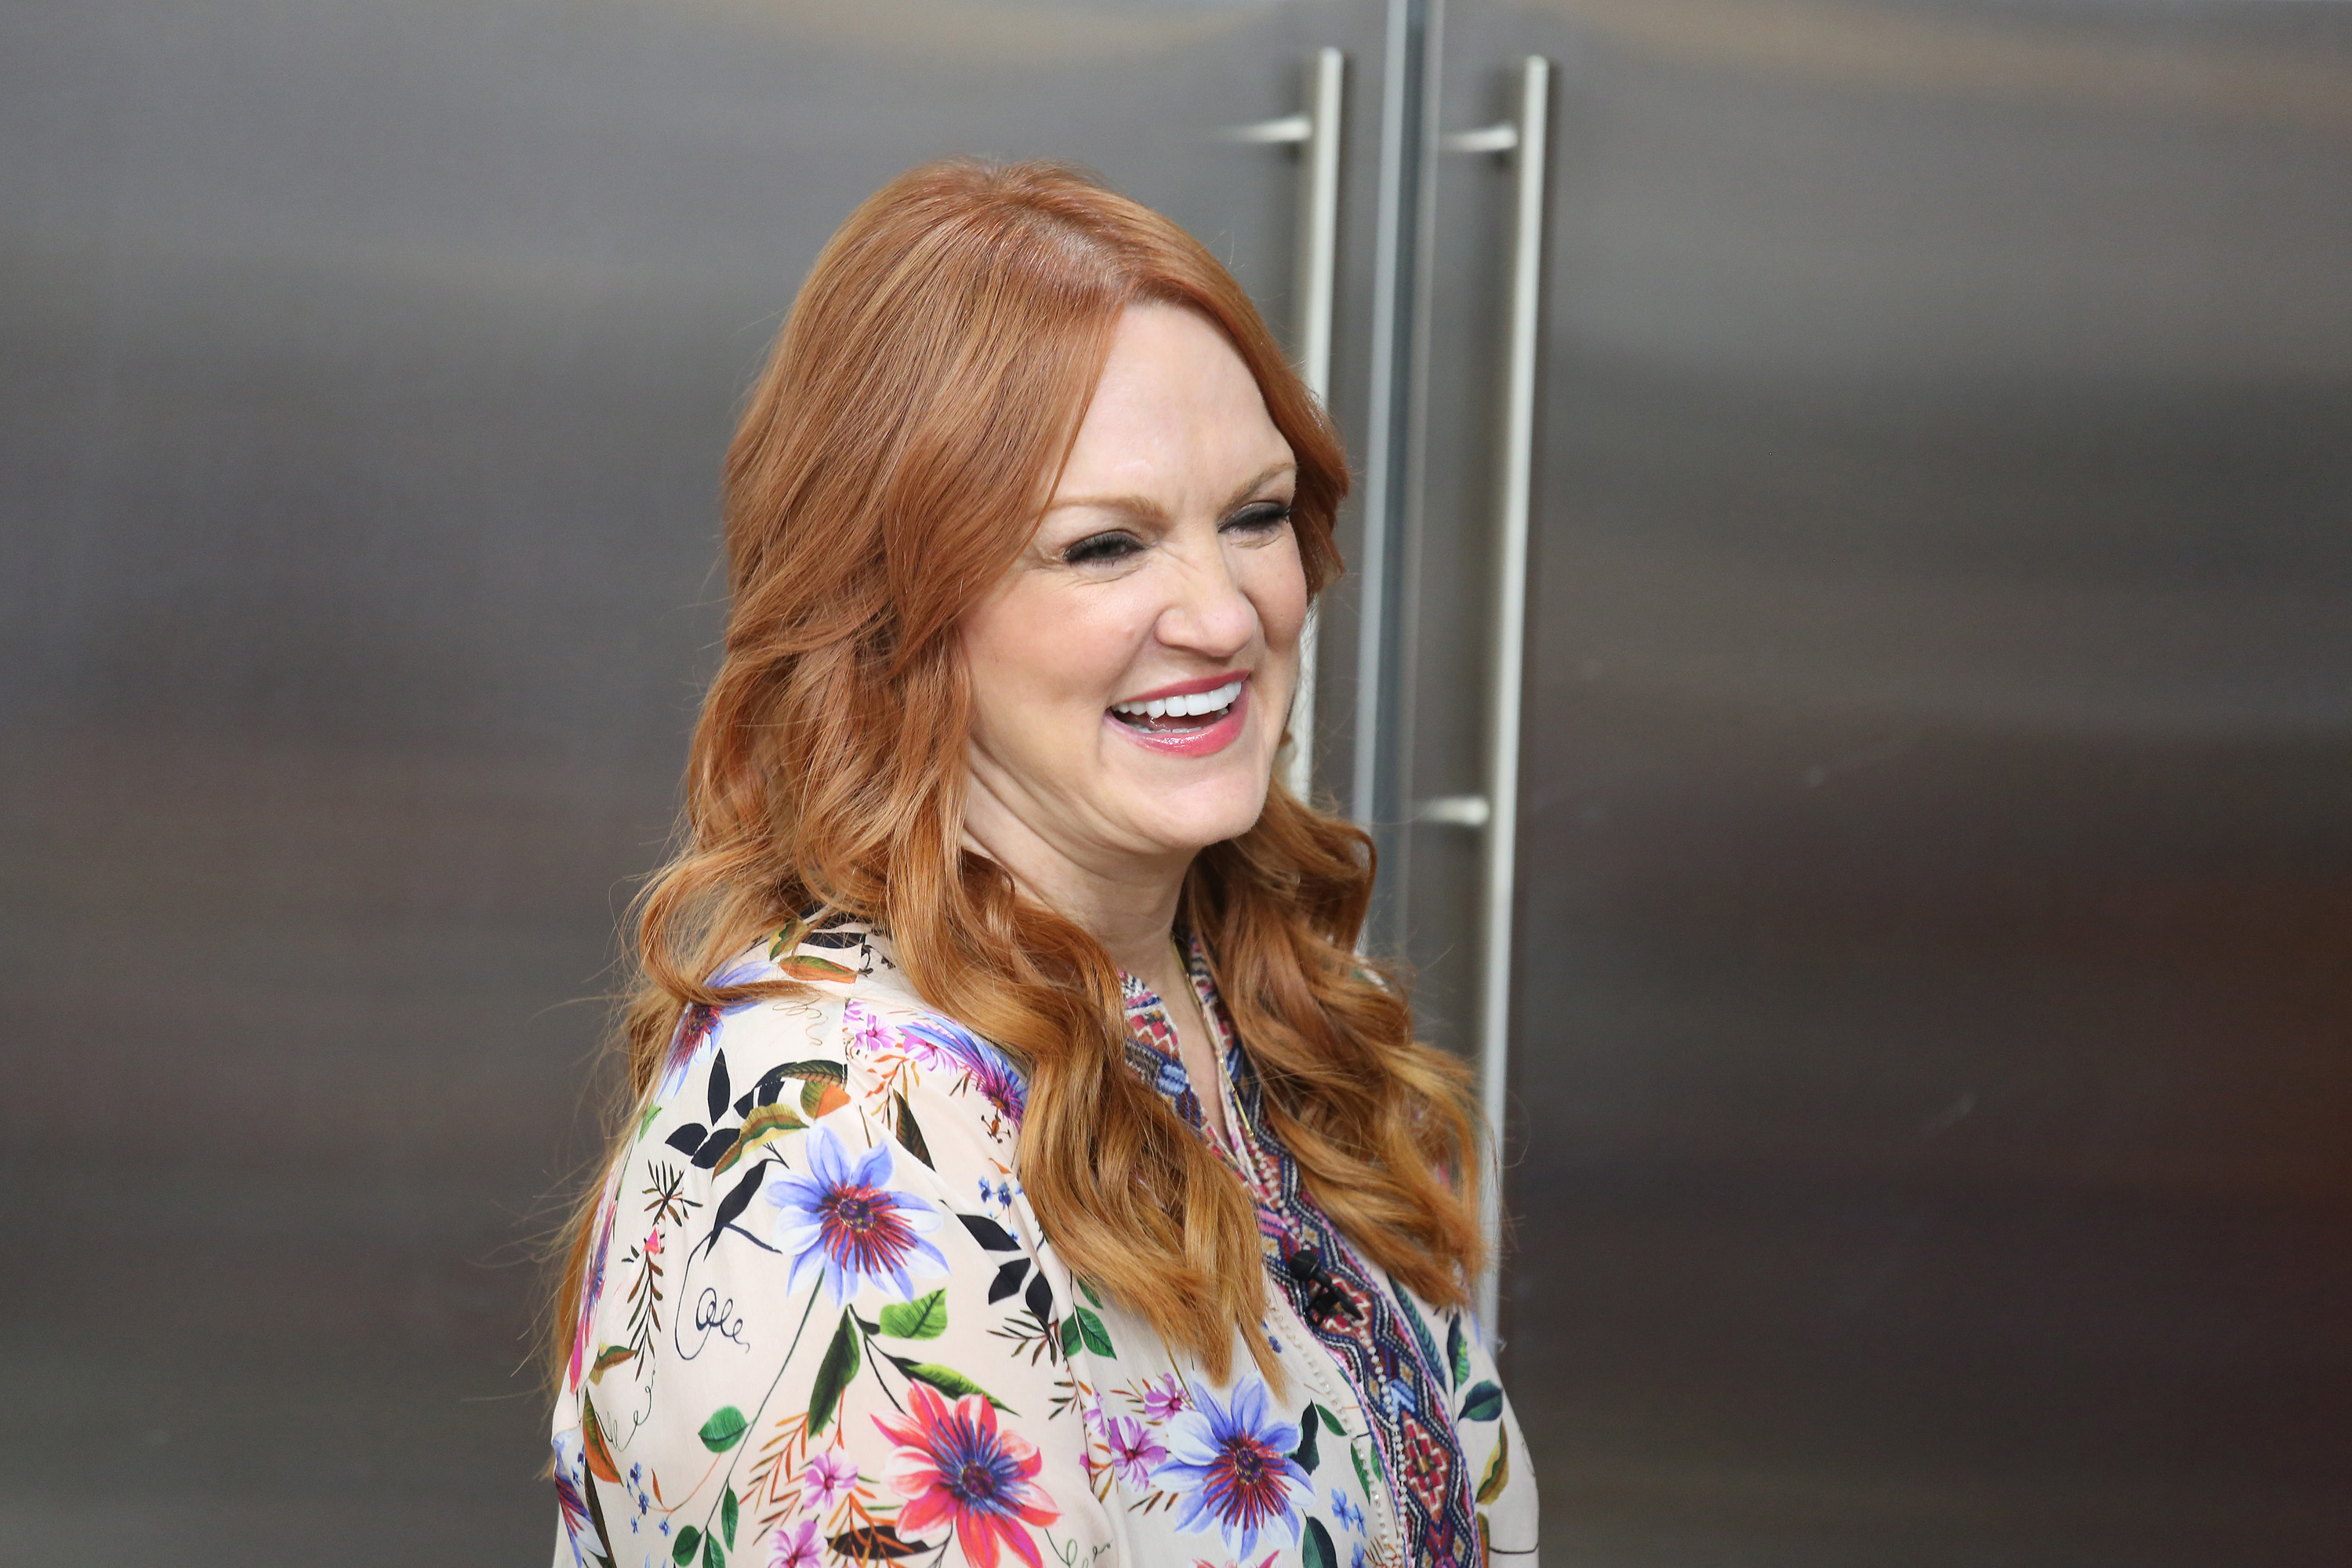 The Pioneer Woman Ree Drummond gives a cooking demonstration on the Today show.